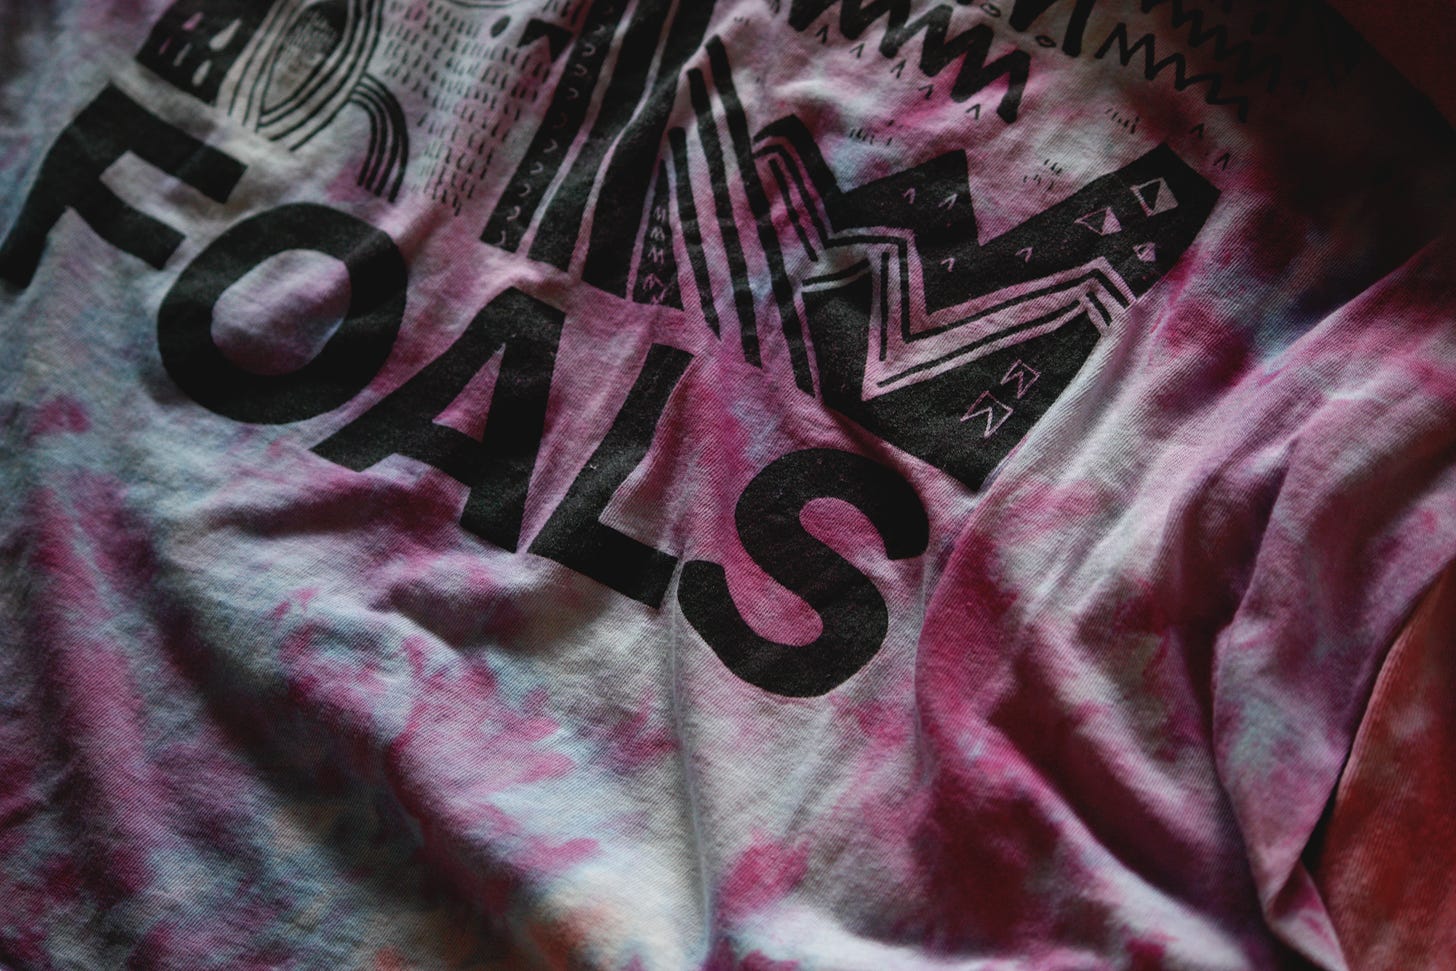 a purple shirt with a printed pattern and the logo of the band Foals